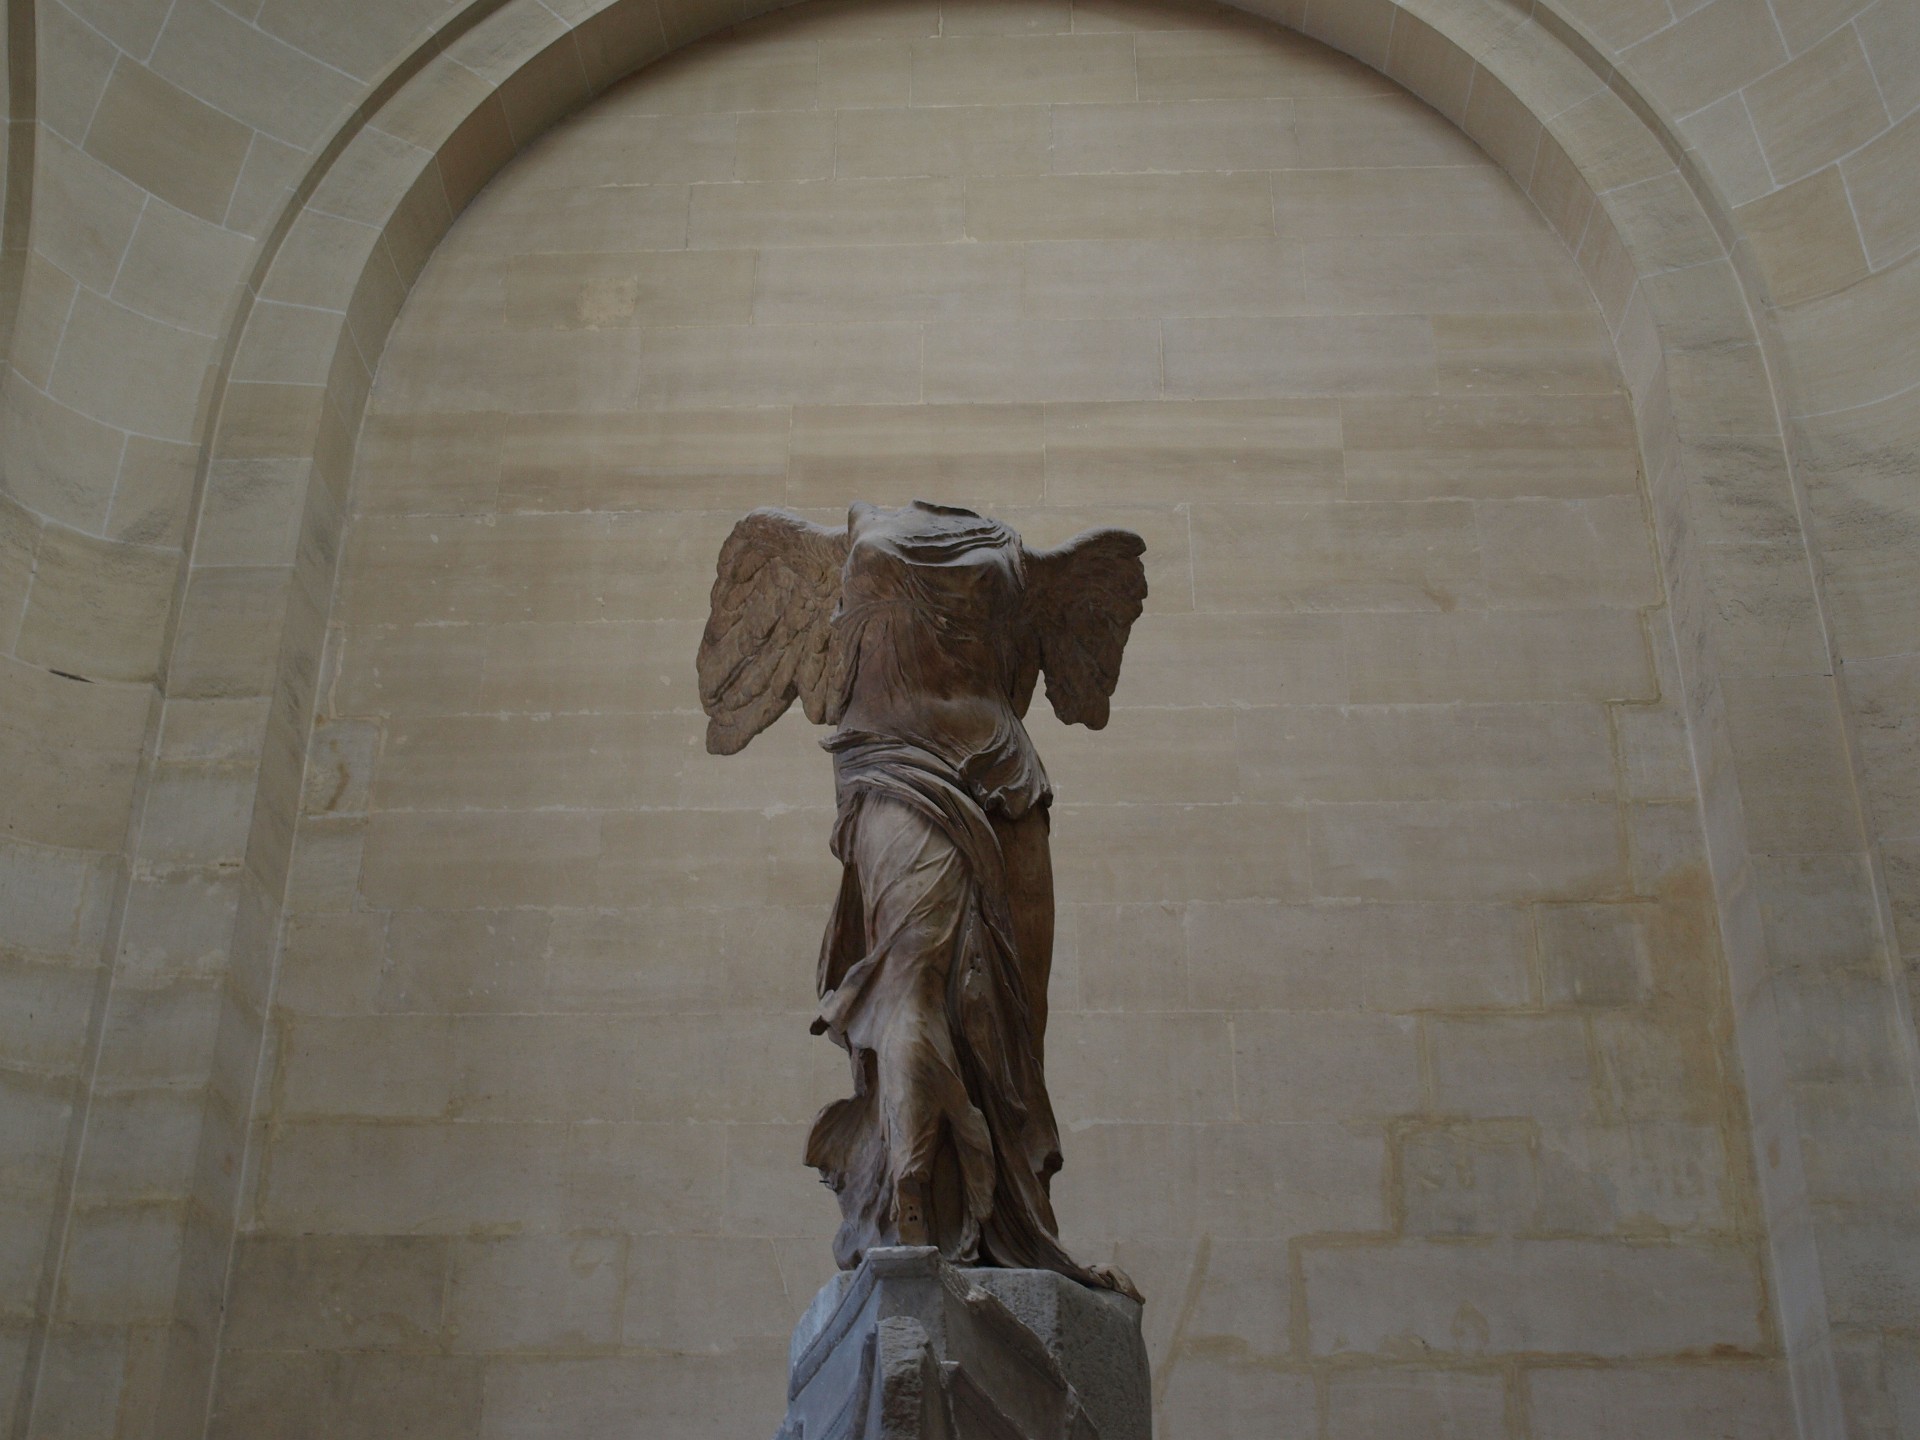 Just Under the Winged Victory